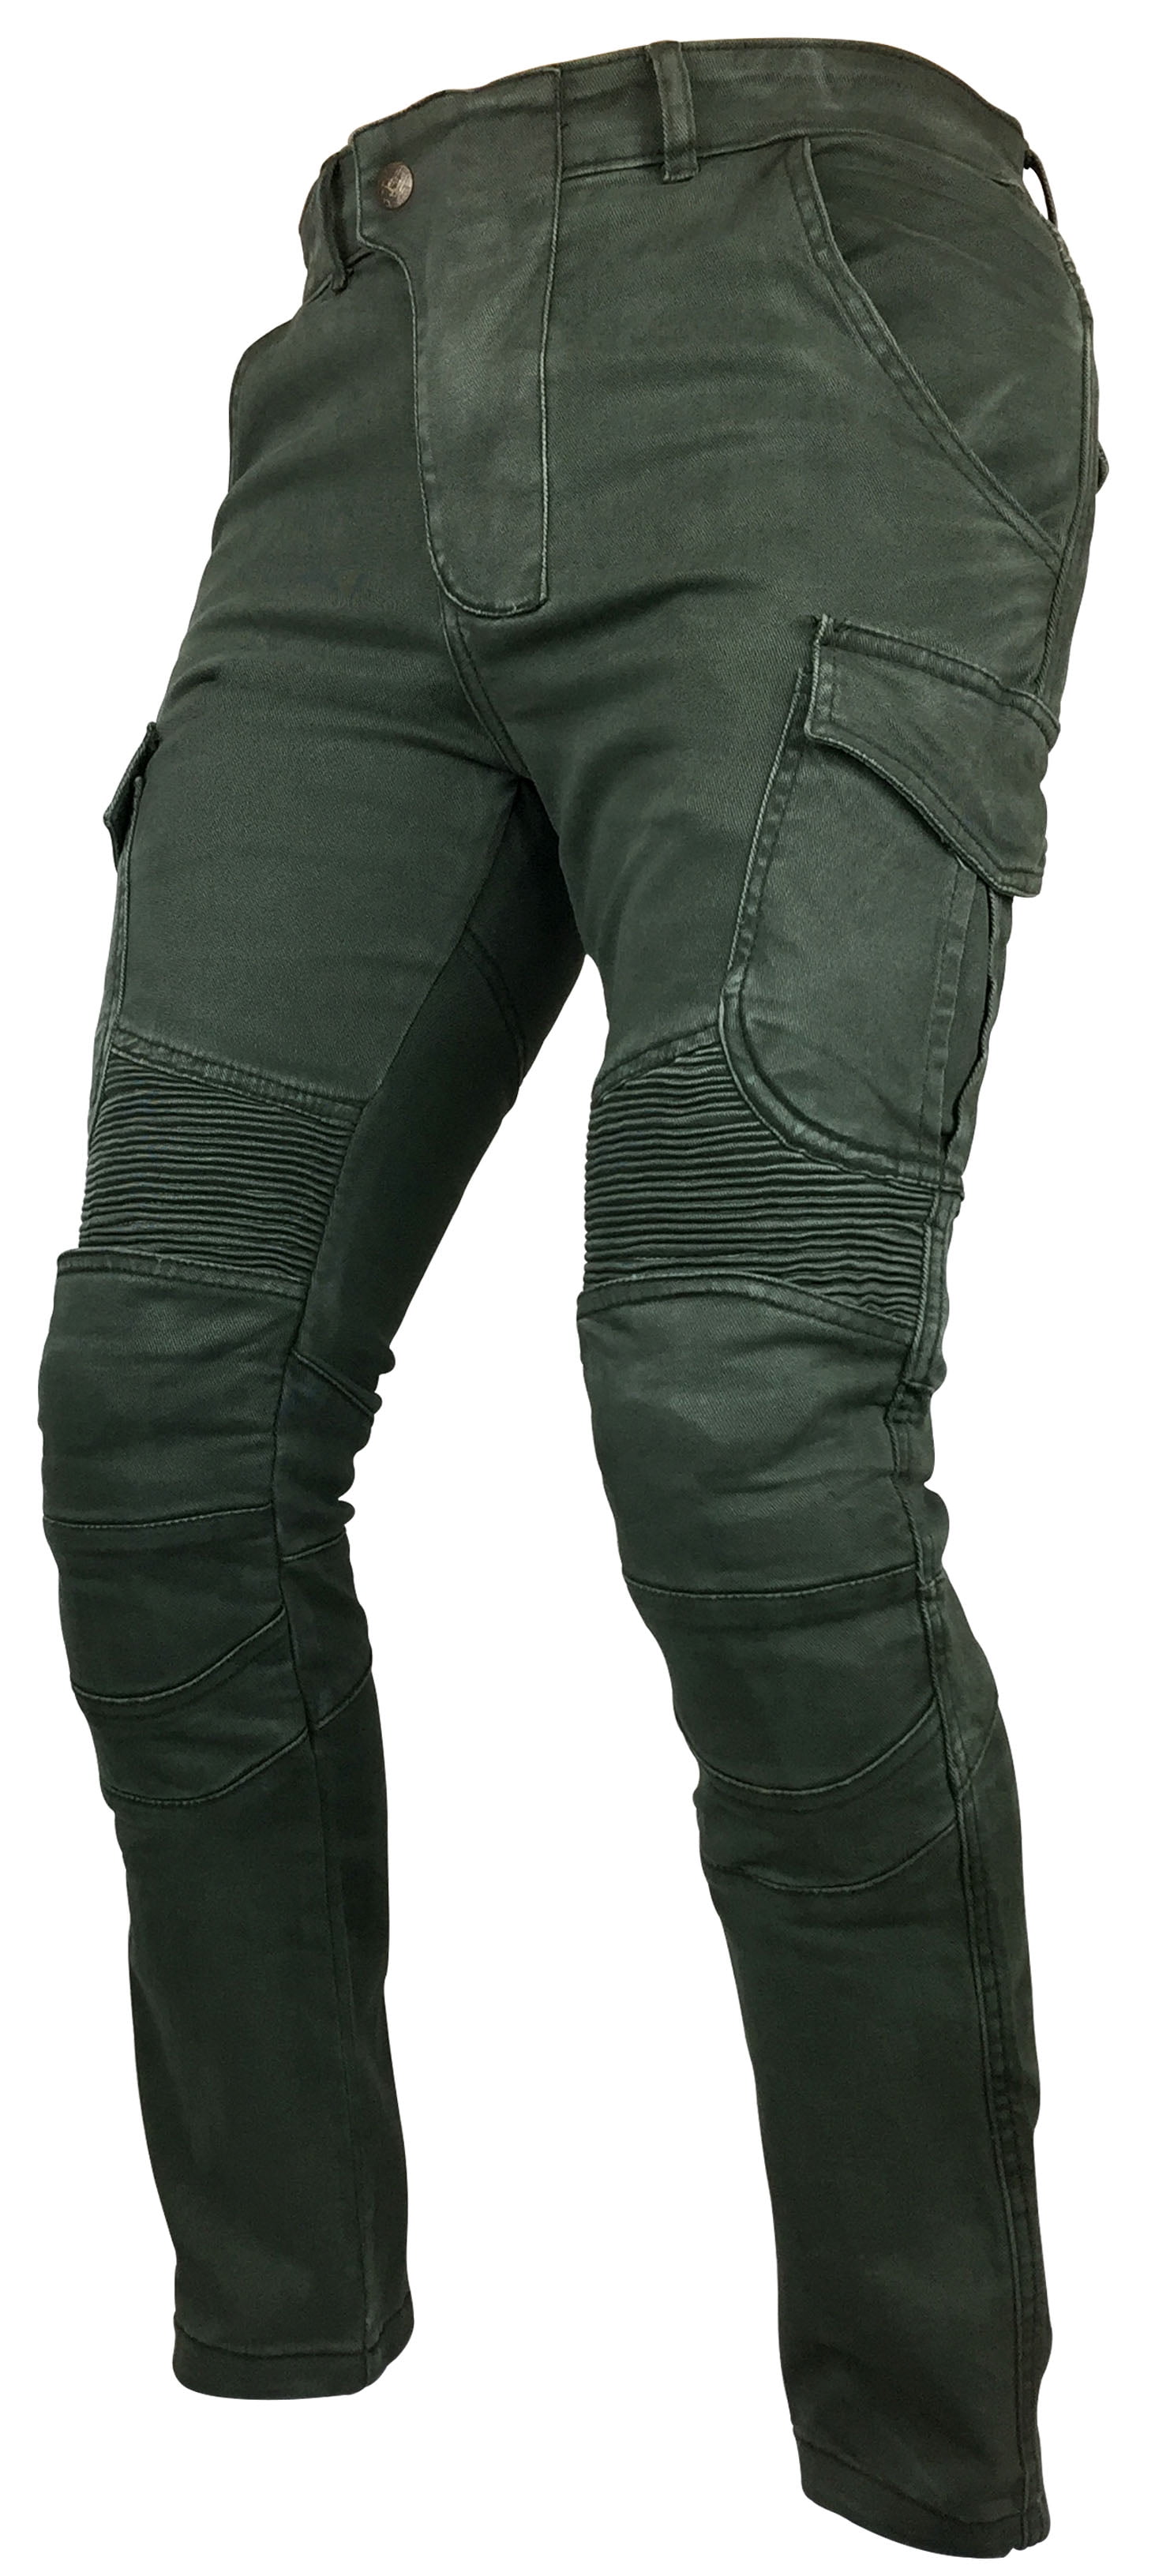 MENS MOTORCYCLE RED CARGO JEANS REINFORCED WITH DuPont™ KEVLAR ® ARAMID FIBRE 